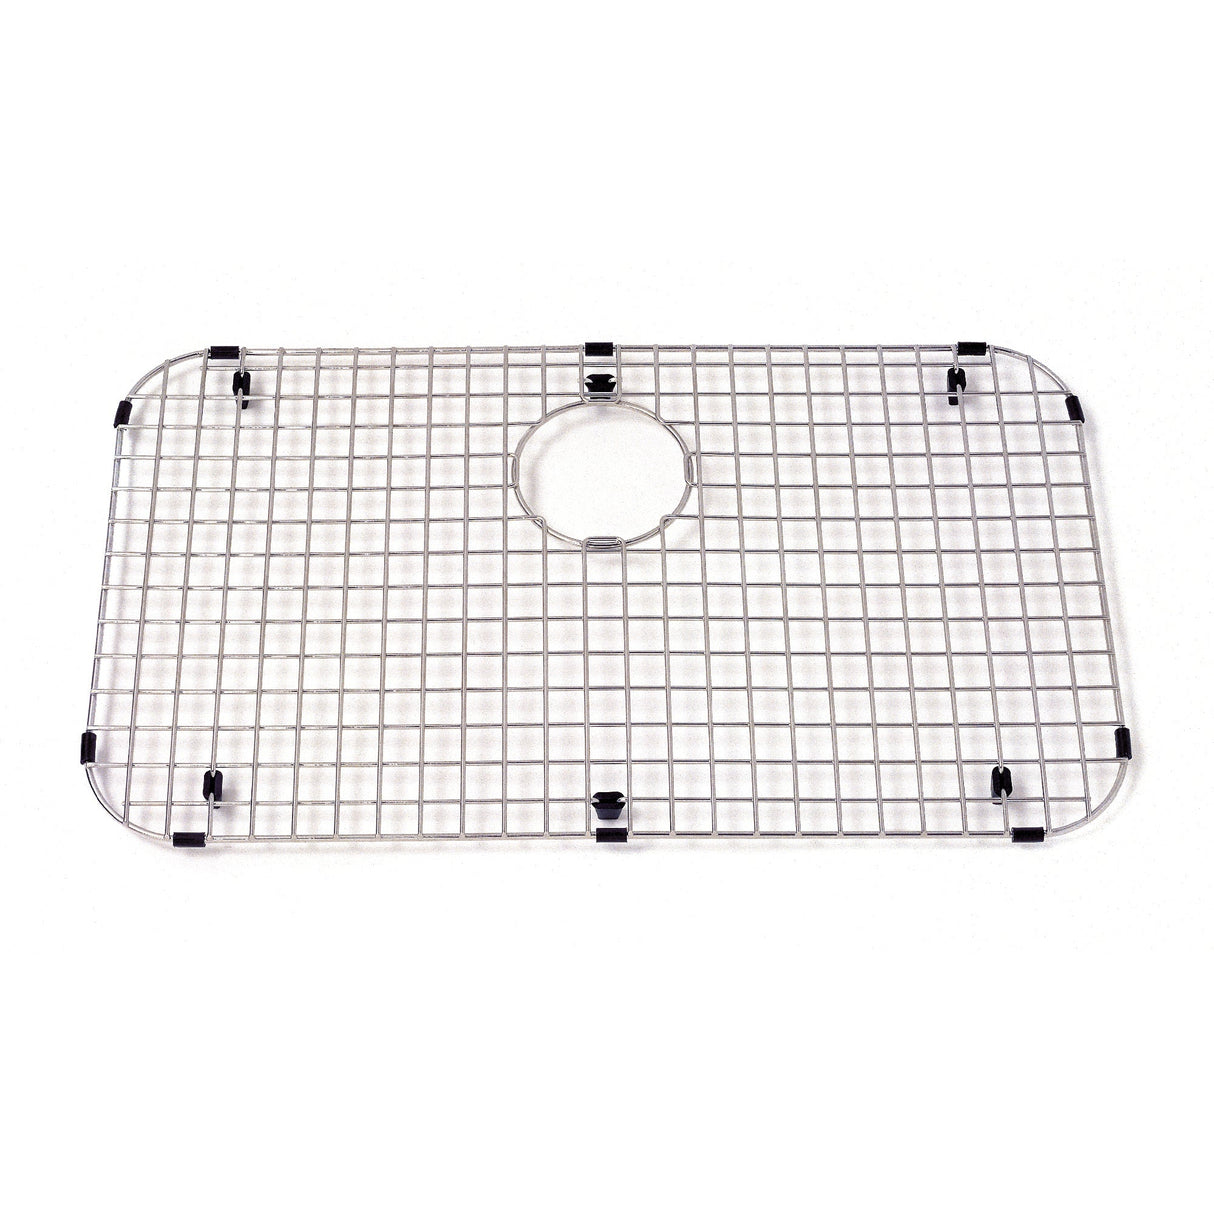 KINDRED BG90S Stainless Steel Bottom Grid for Sink 14.63-in x 25.25-in In Stainless Steel